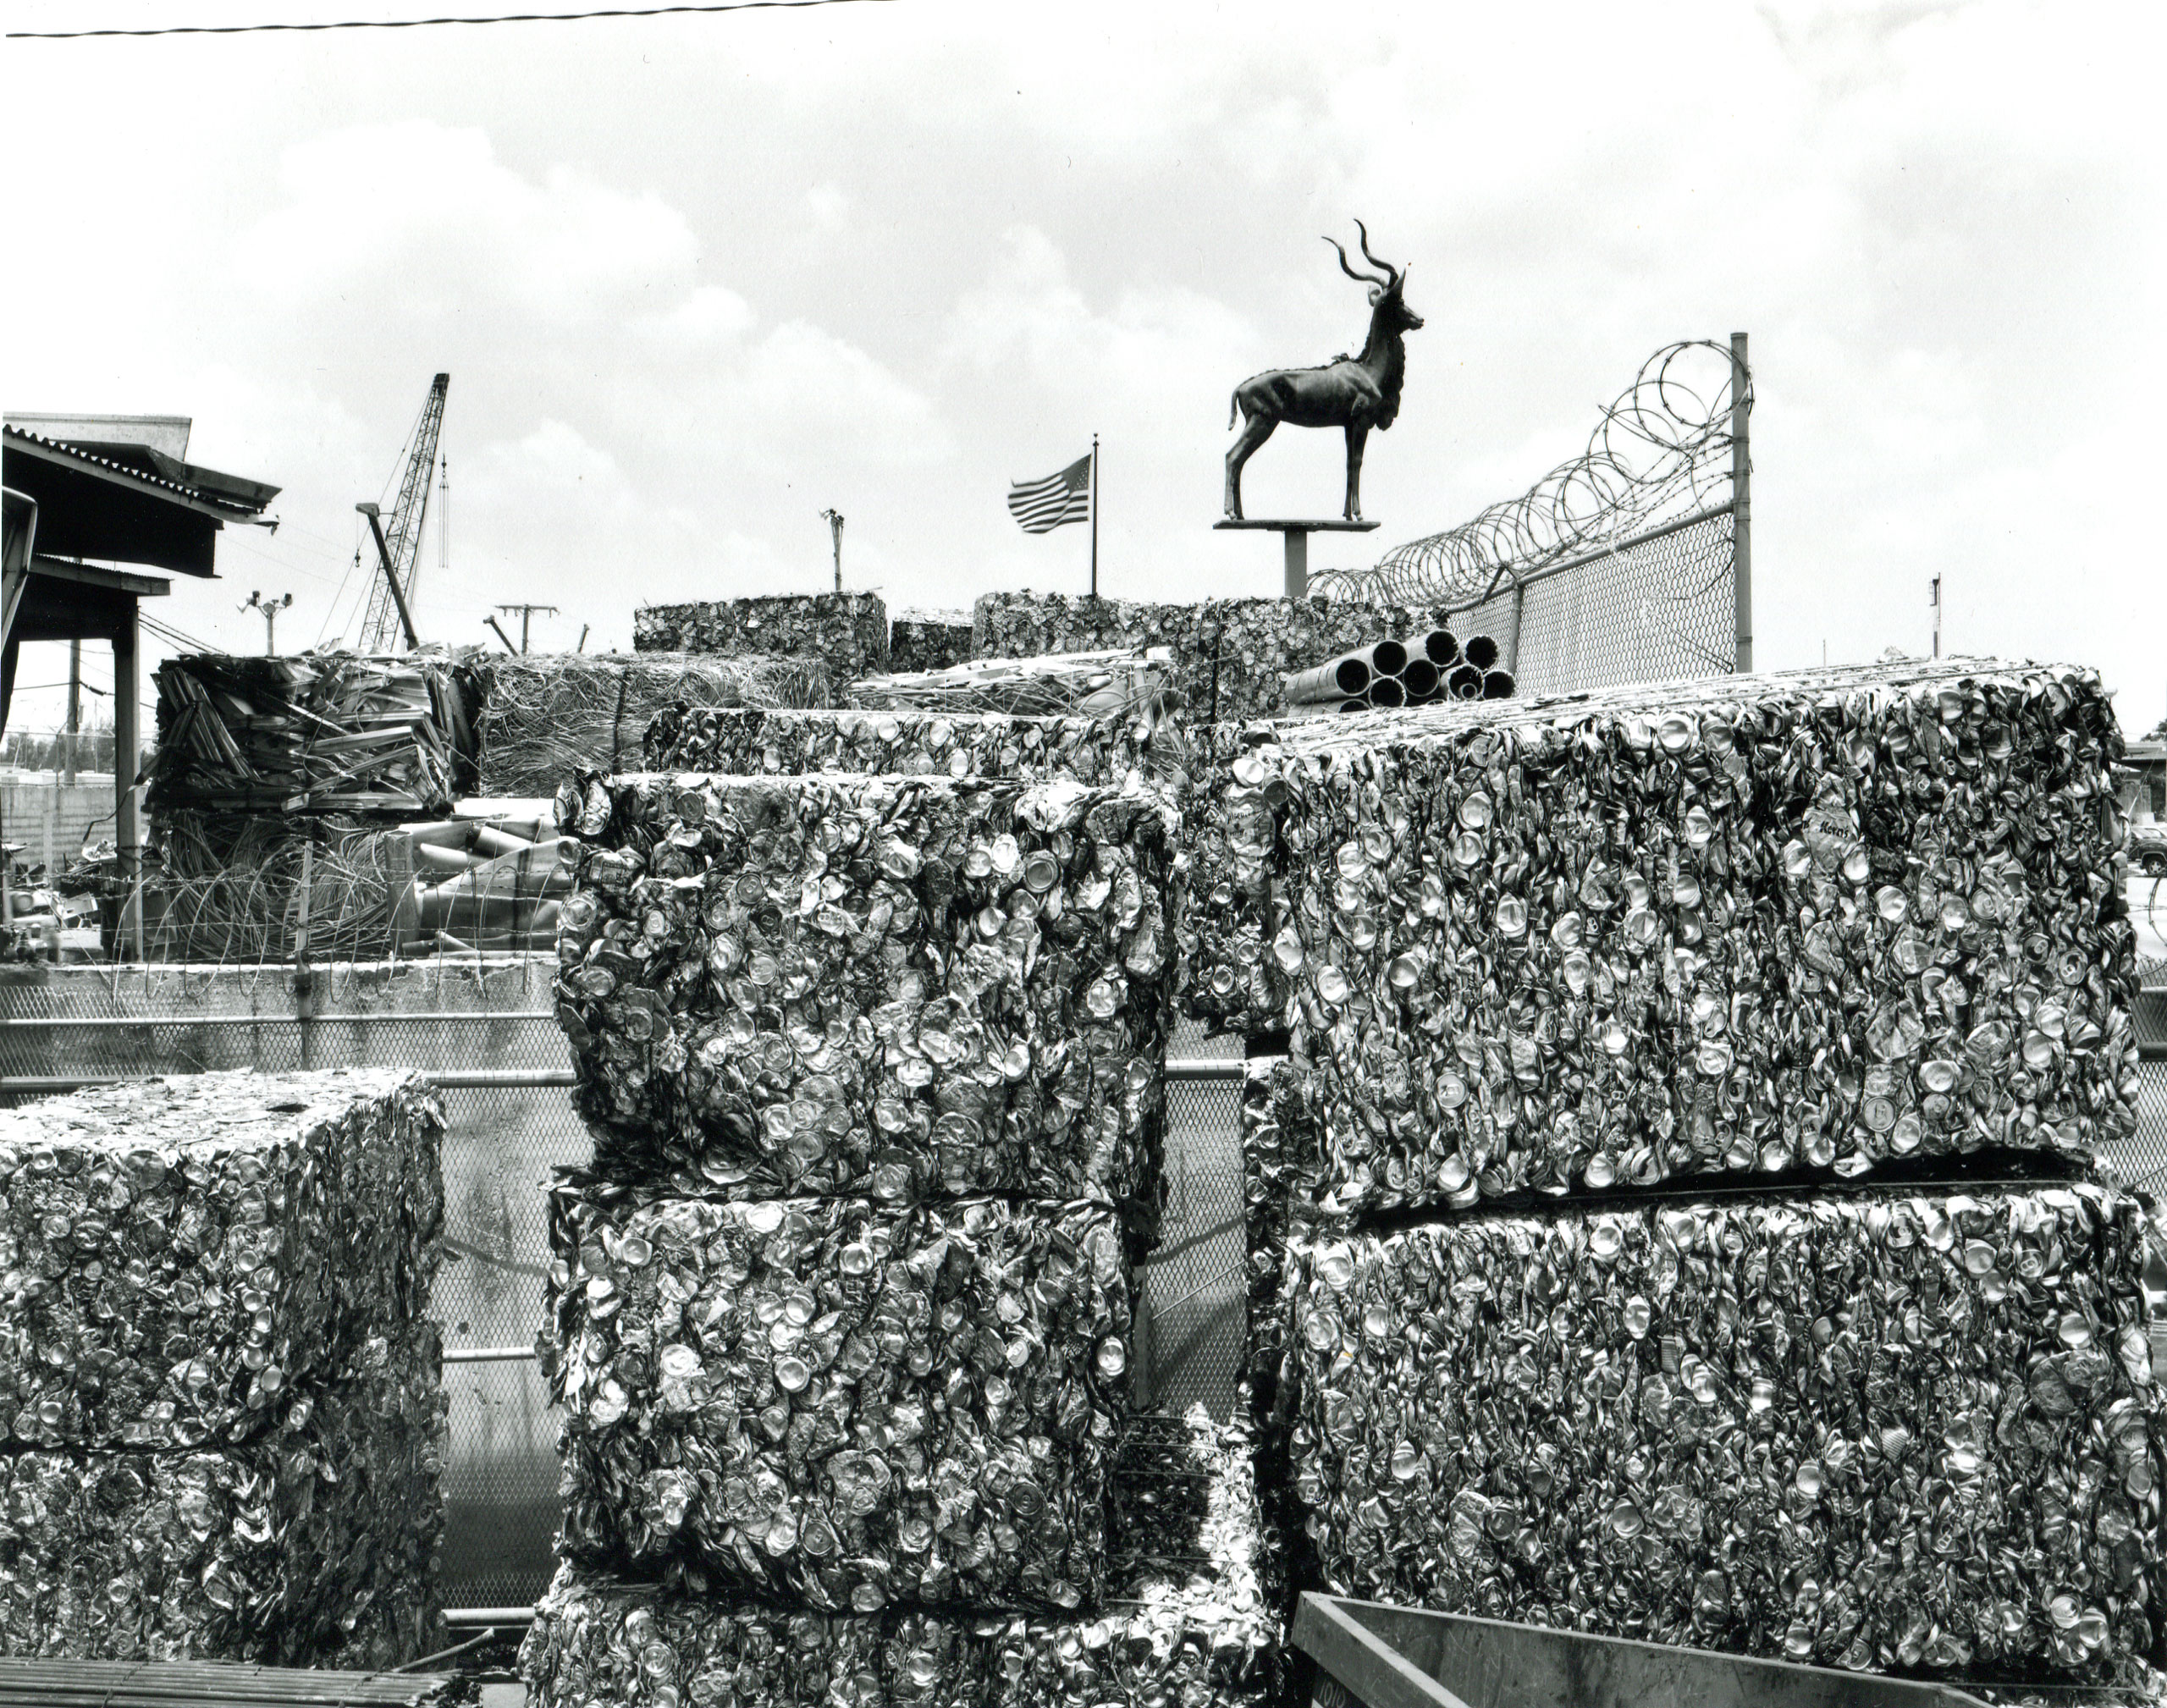 Cans with Flag and Ram, Miami, Florida, 2001